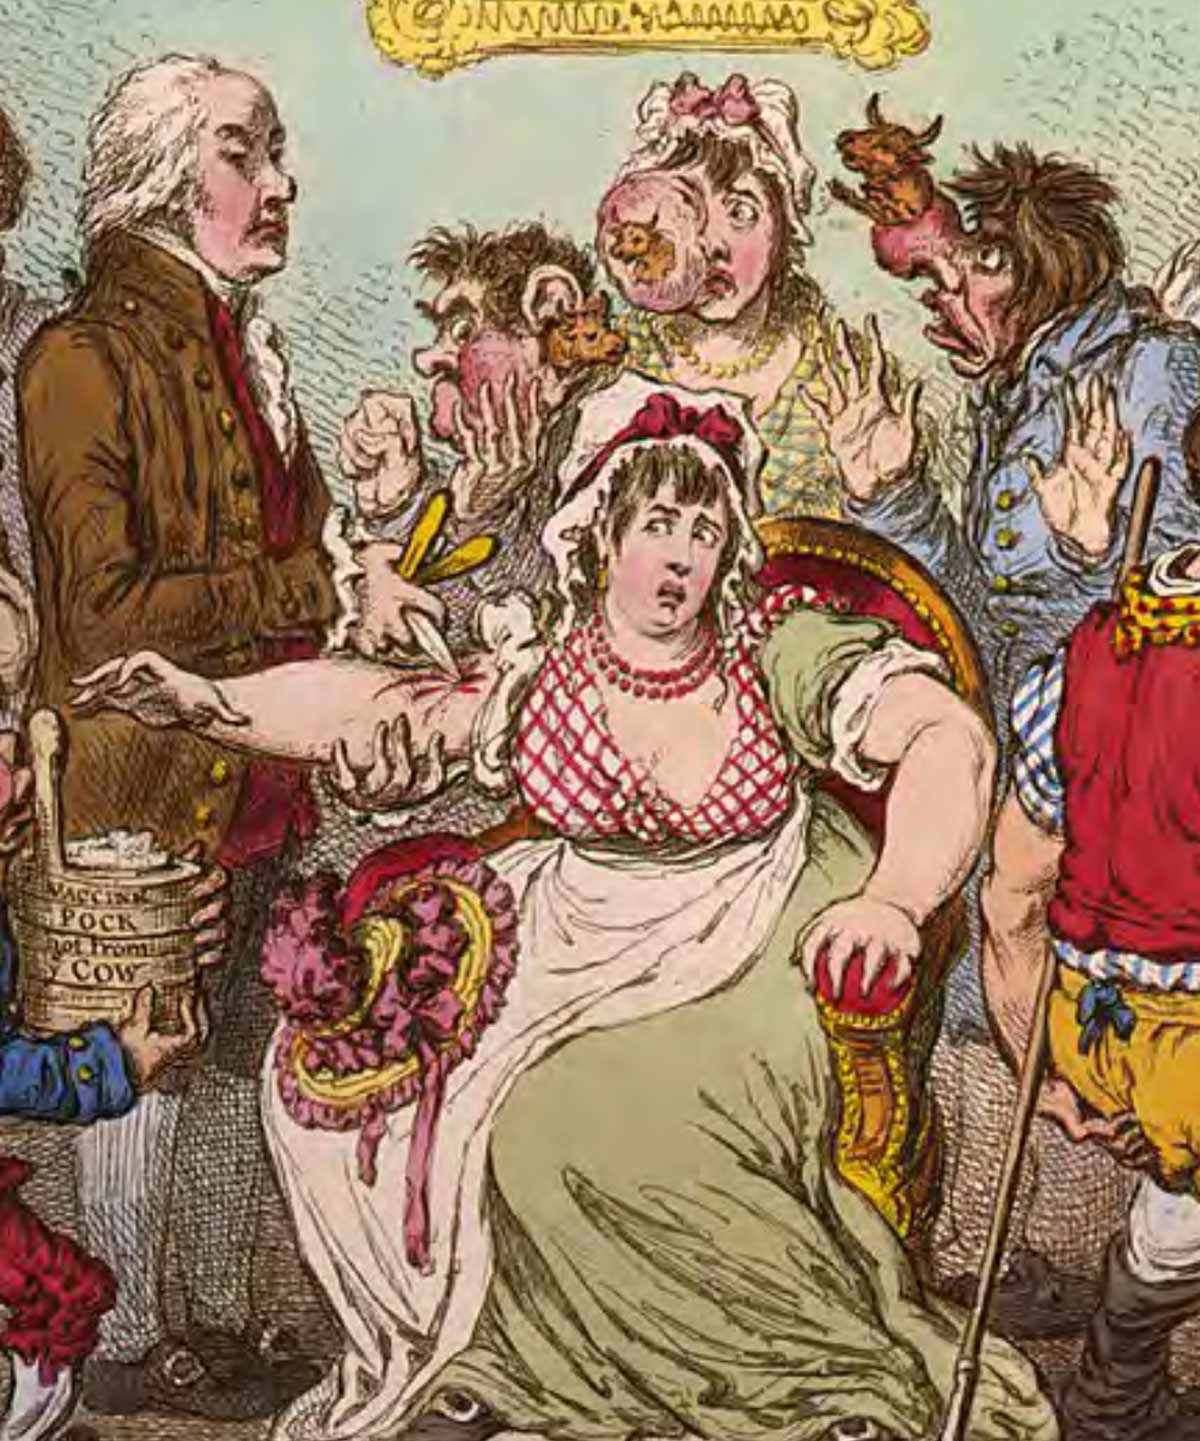 People have been arguing about vaccinations for hundreds of years. This image is part of a caricature from 1802. It appeared in the Publications of the Anti-Vaccine Society. It shows exaggerated fears about the effects of the smallpox vaccine – including small cows growing from people’s bodies! Image: James Gillray, Library of Congress.